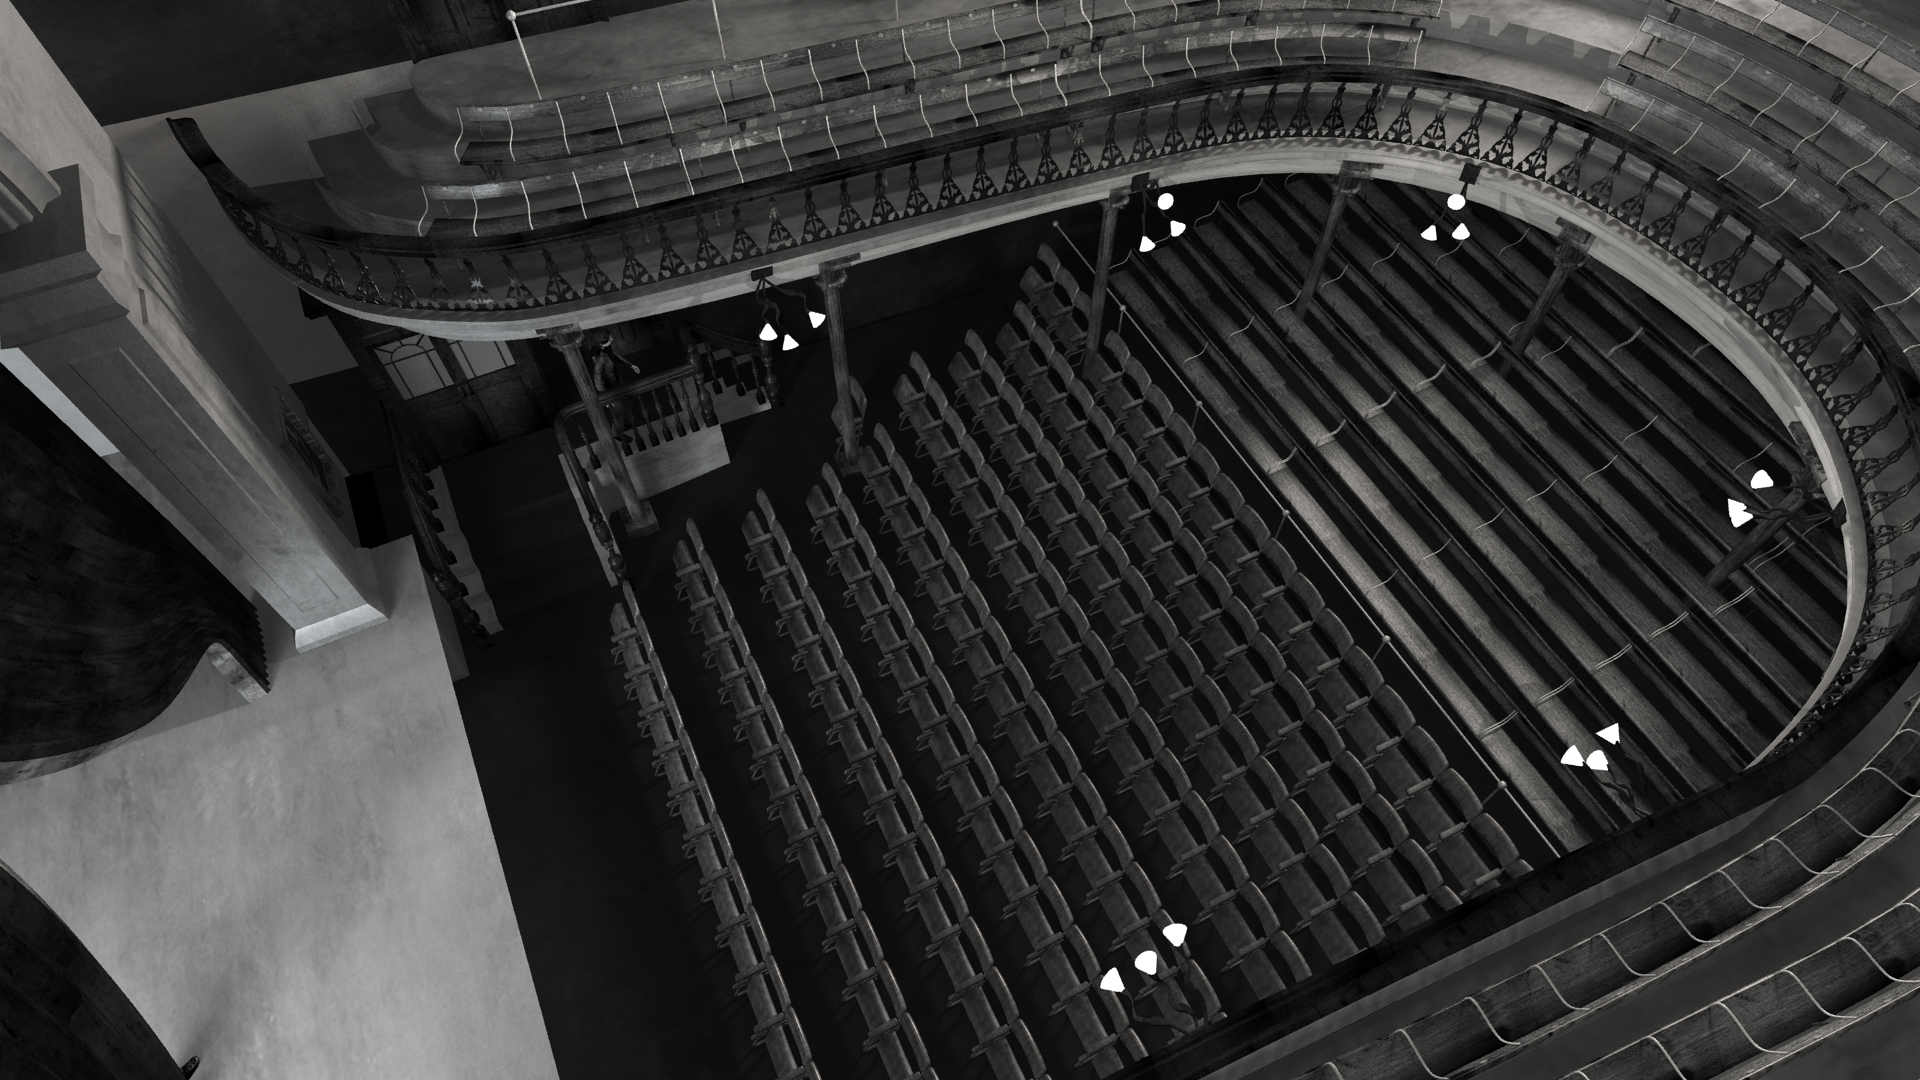 View of auditorium of Abbey Theatre, 1904. Digital model by Hugh Denard (research) and Niall Ó hOisín/Noho (modelling), 2011.